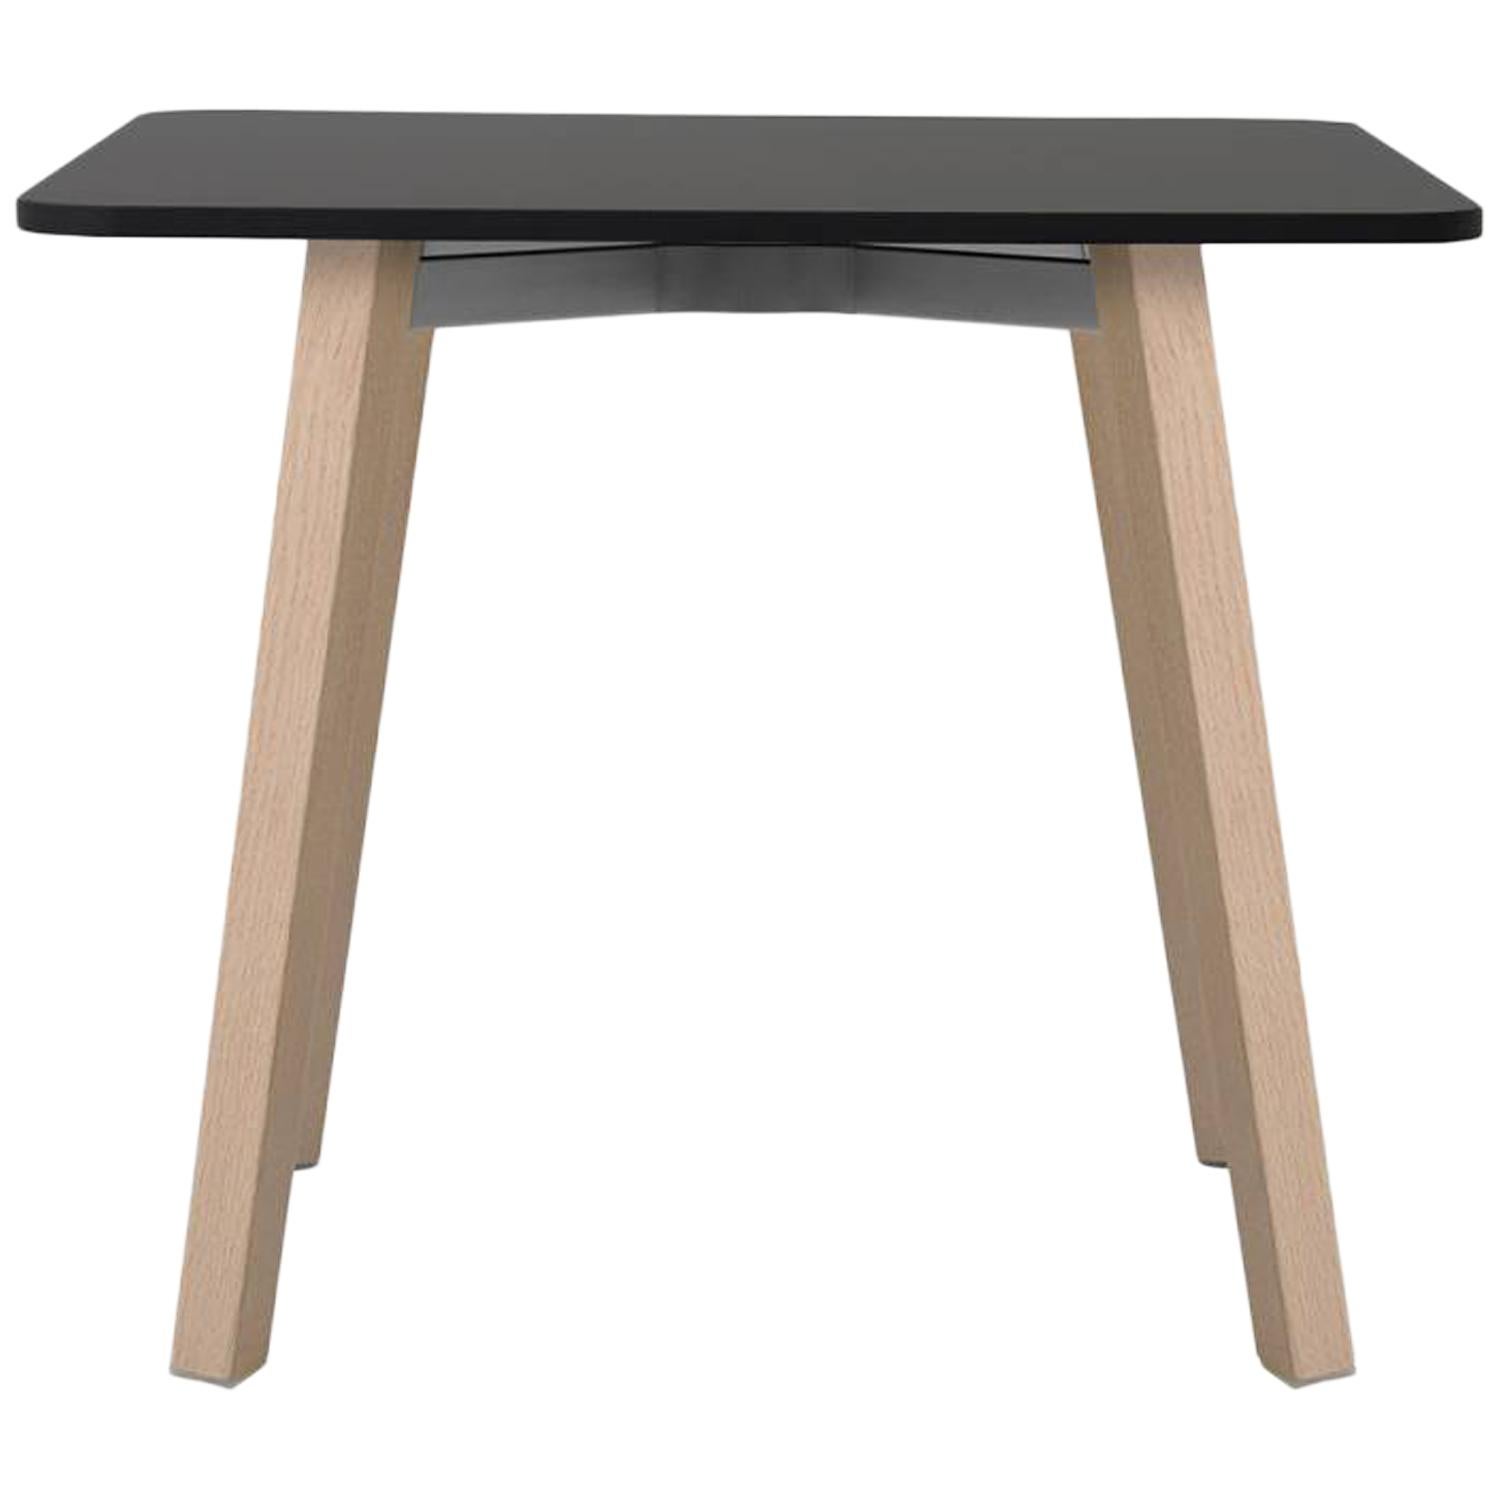 Emeco Su Low Table in Wood with Black Laminate Top by Nendo